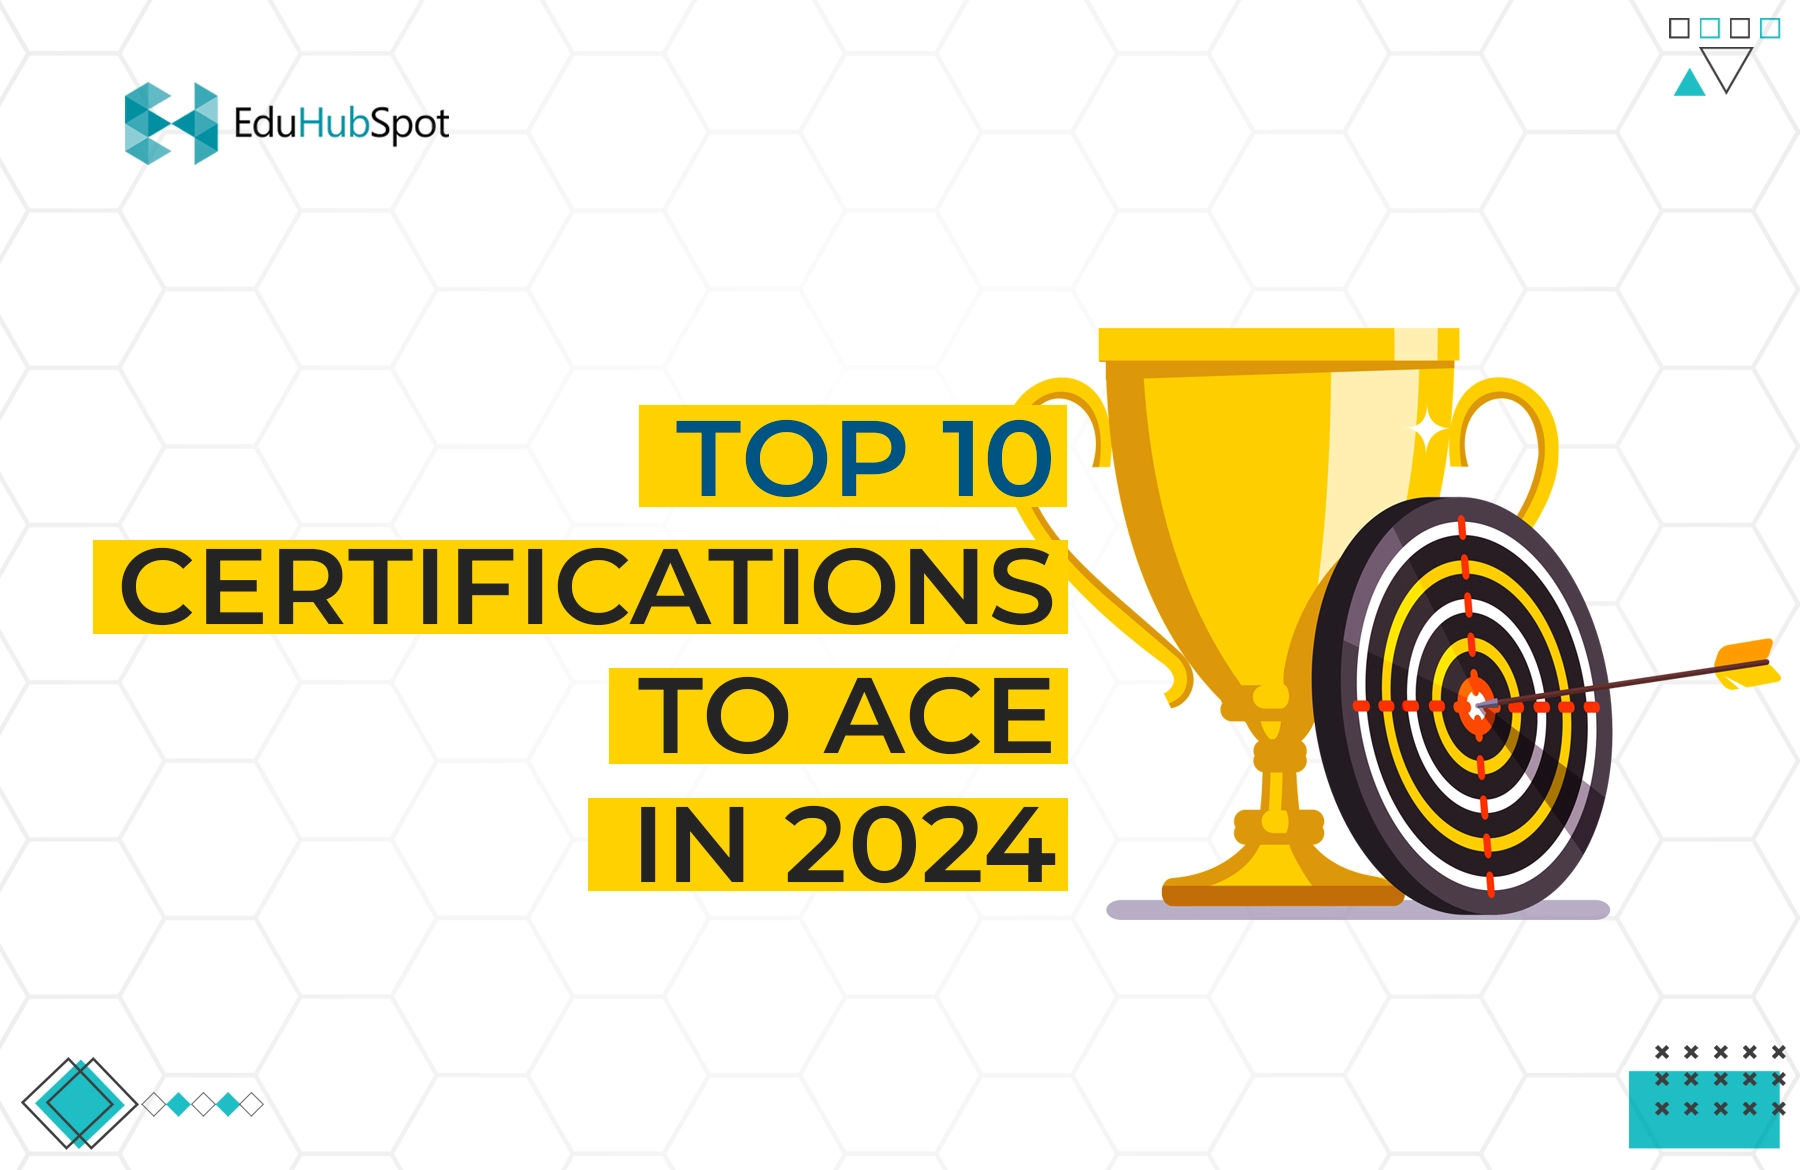 Top 10 Certifications To Ace in 2024